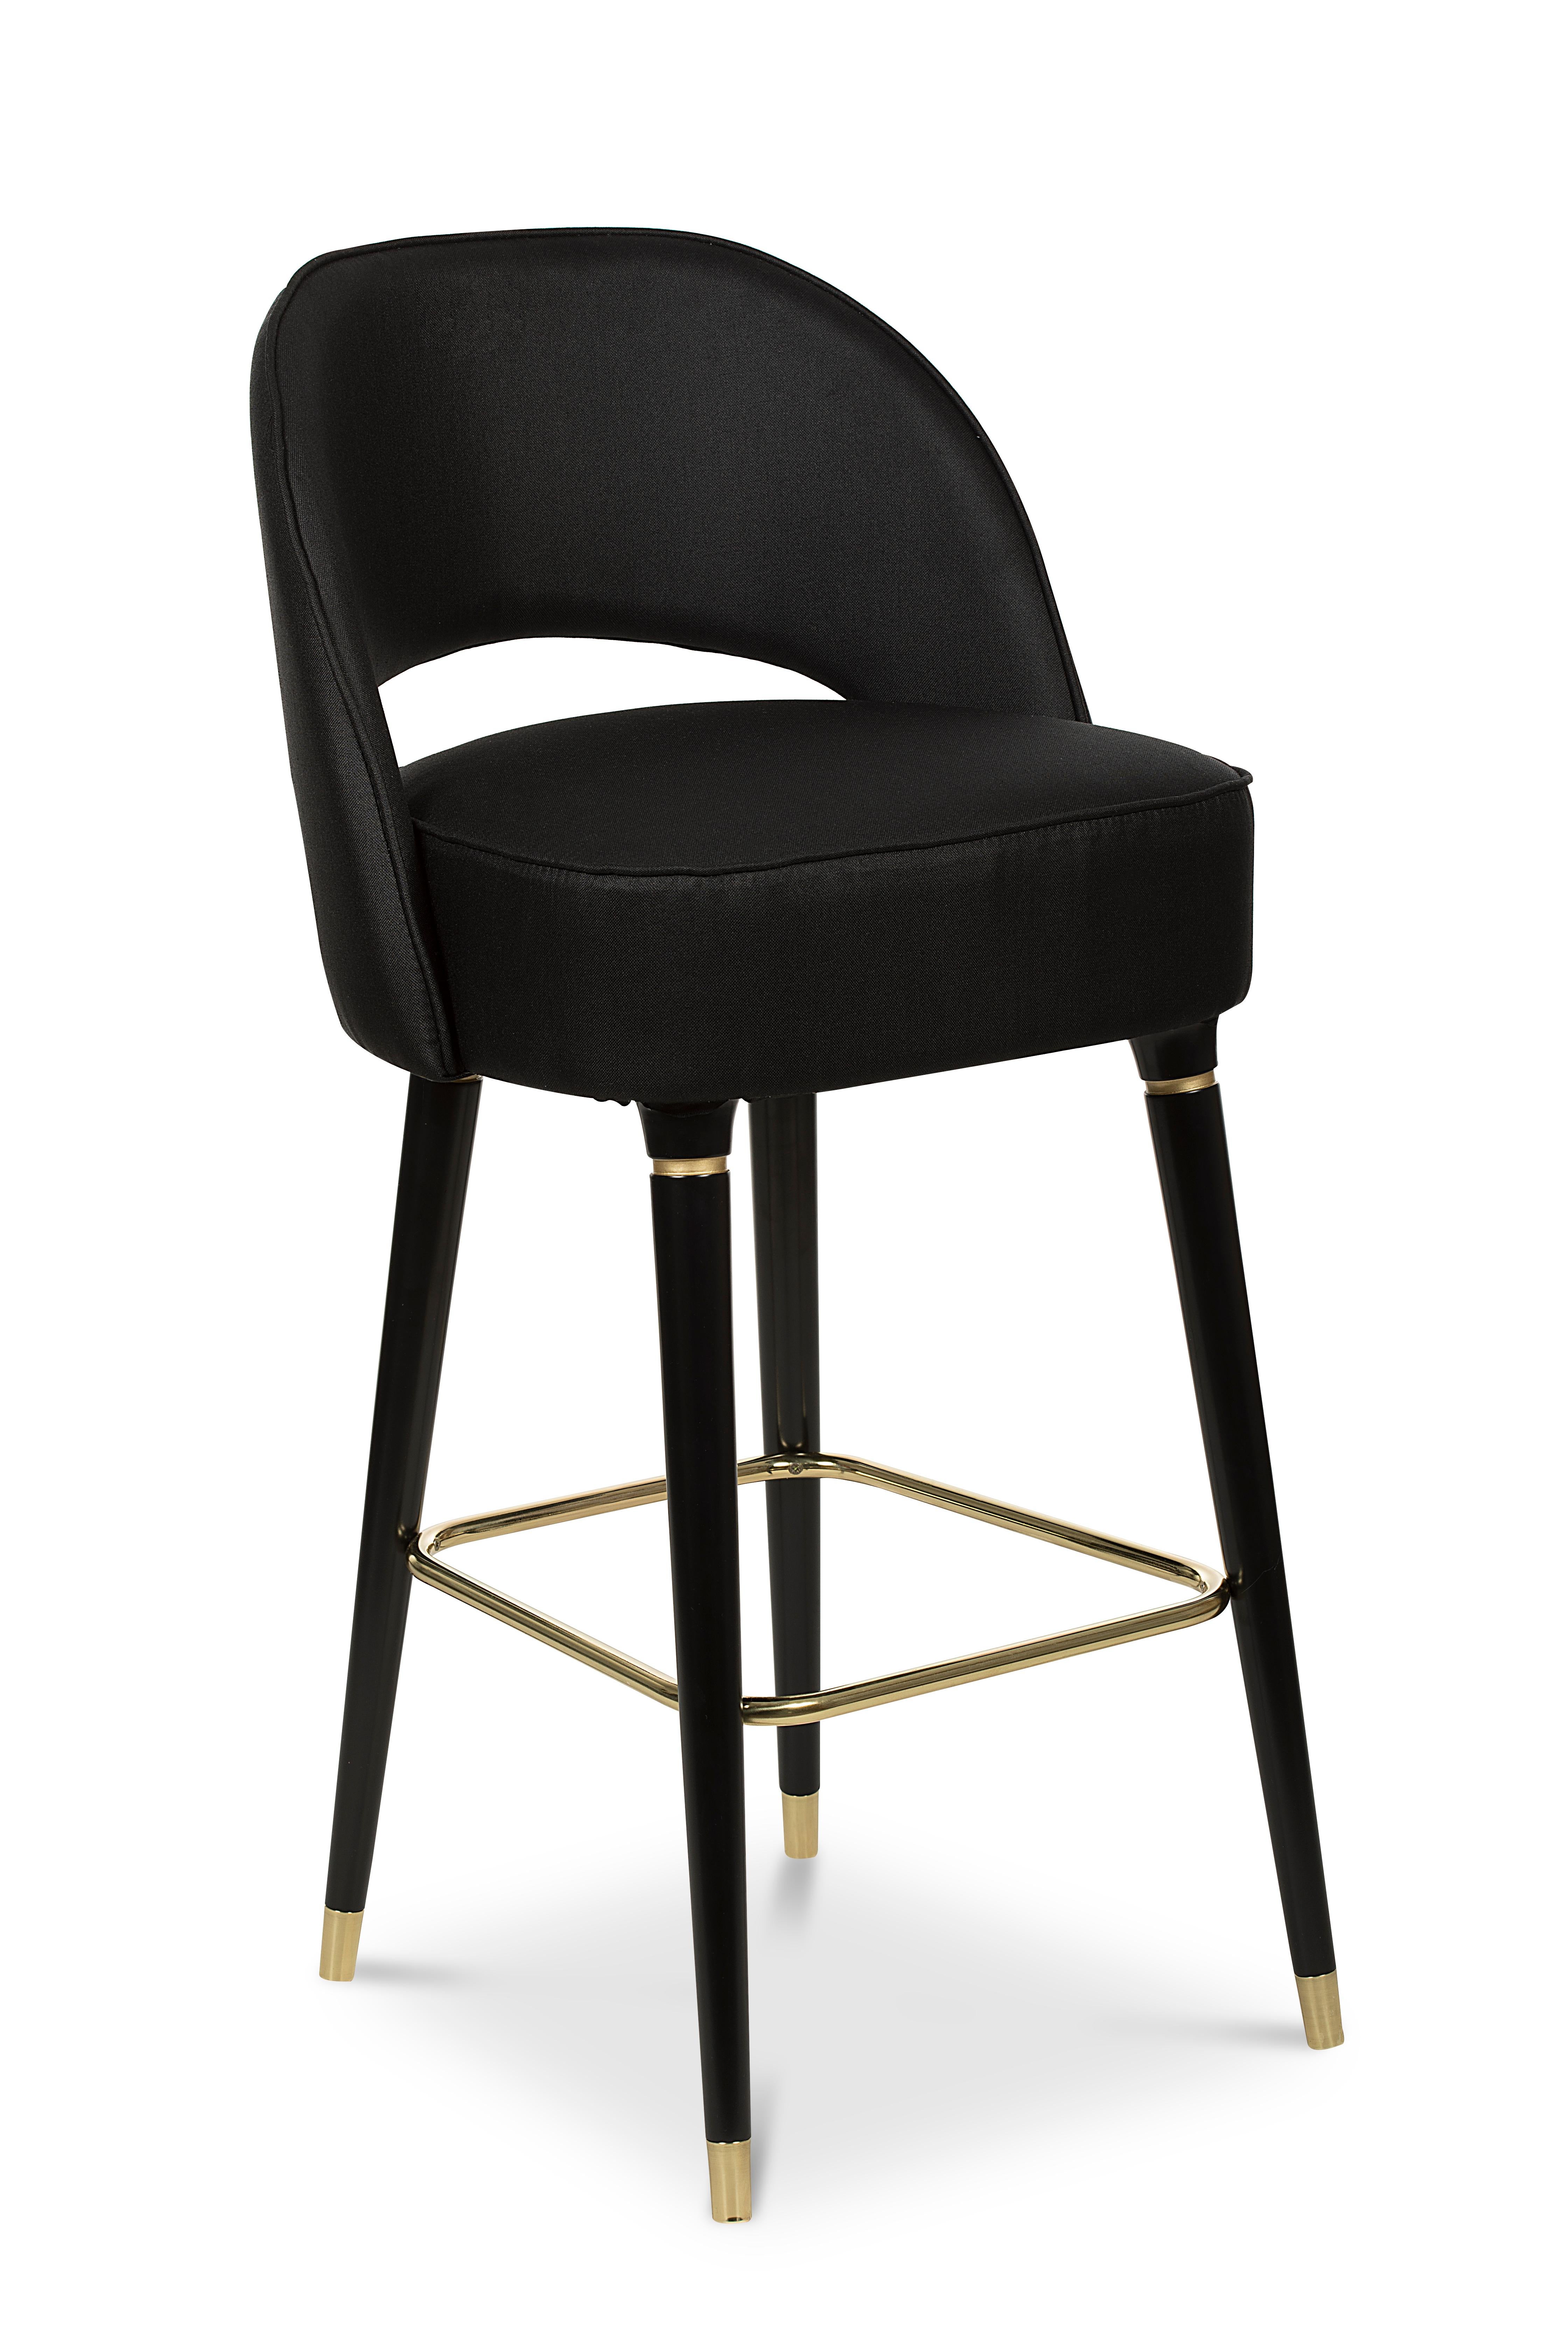 Mid-Century Modern Collins Bar Chair in Black with Brass Detail by Essential Home For Sale